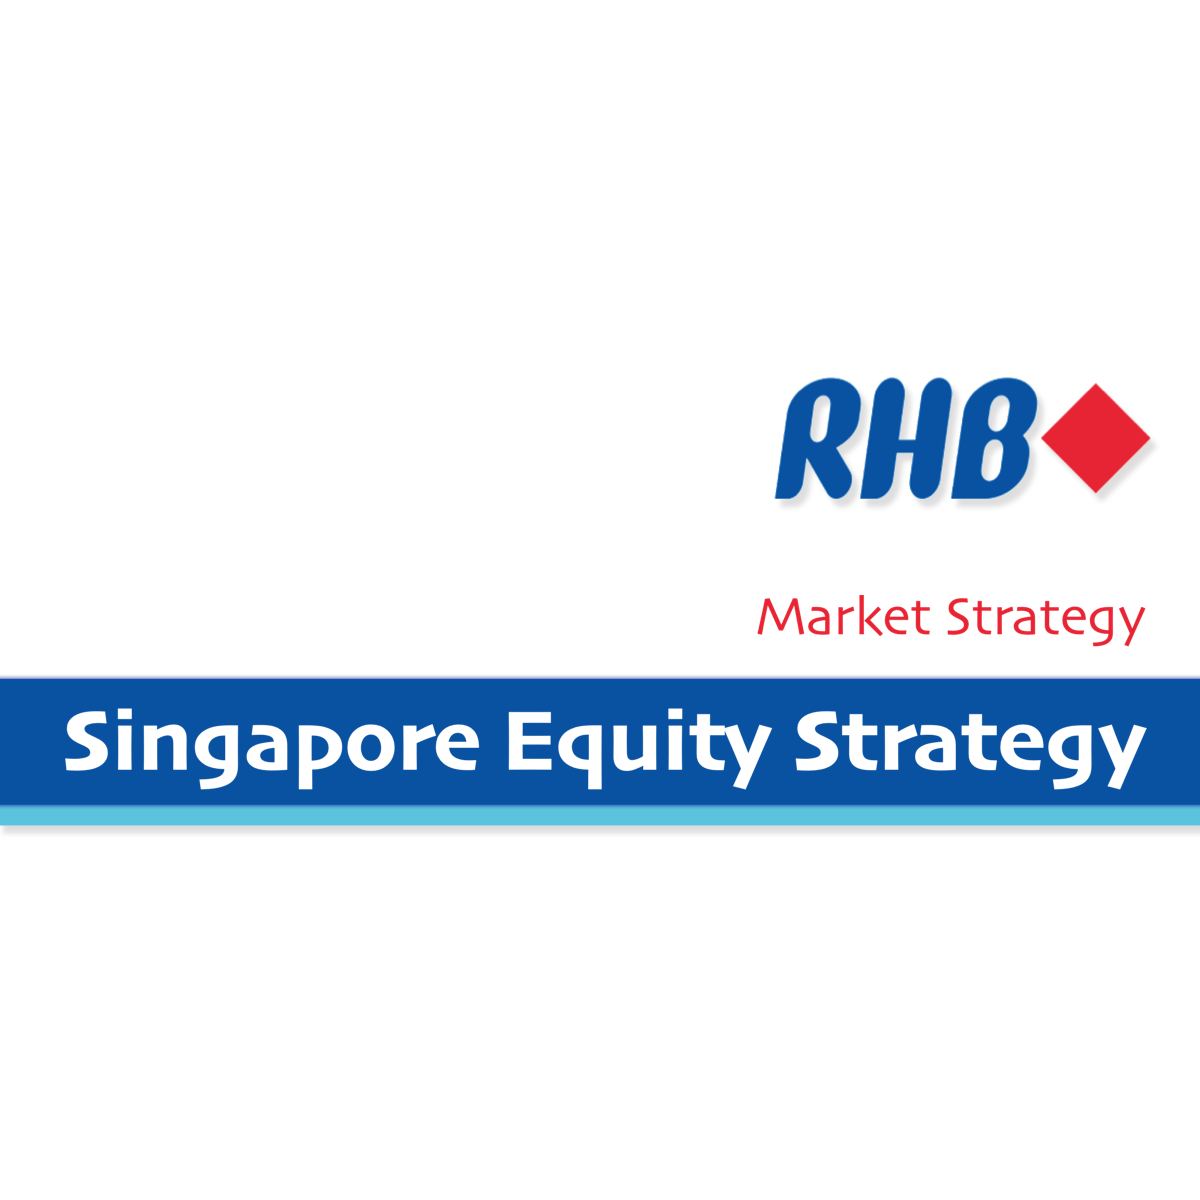 Singapore Equities Strategy - RHB Investment Research | SGinvestors.io